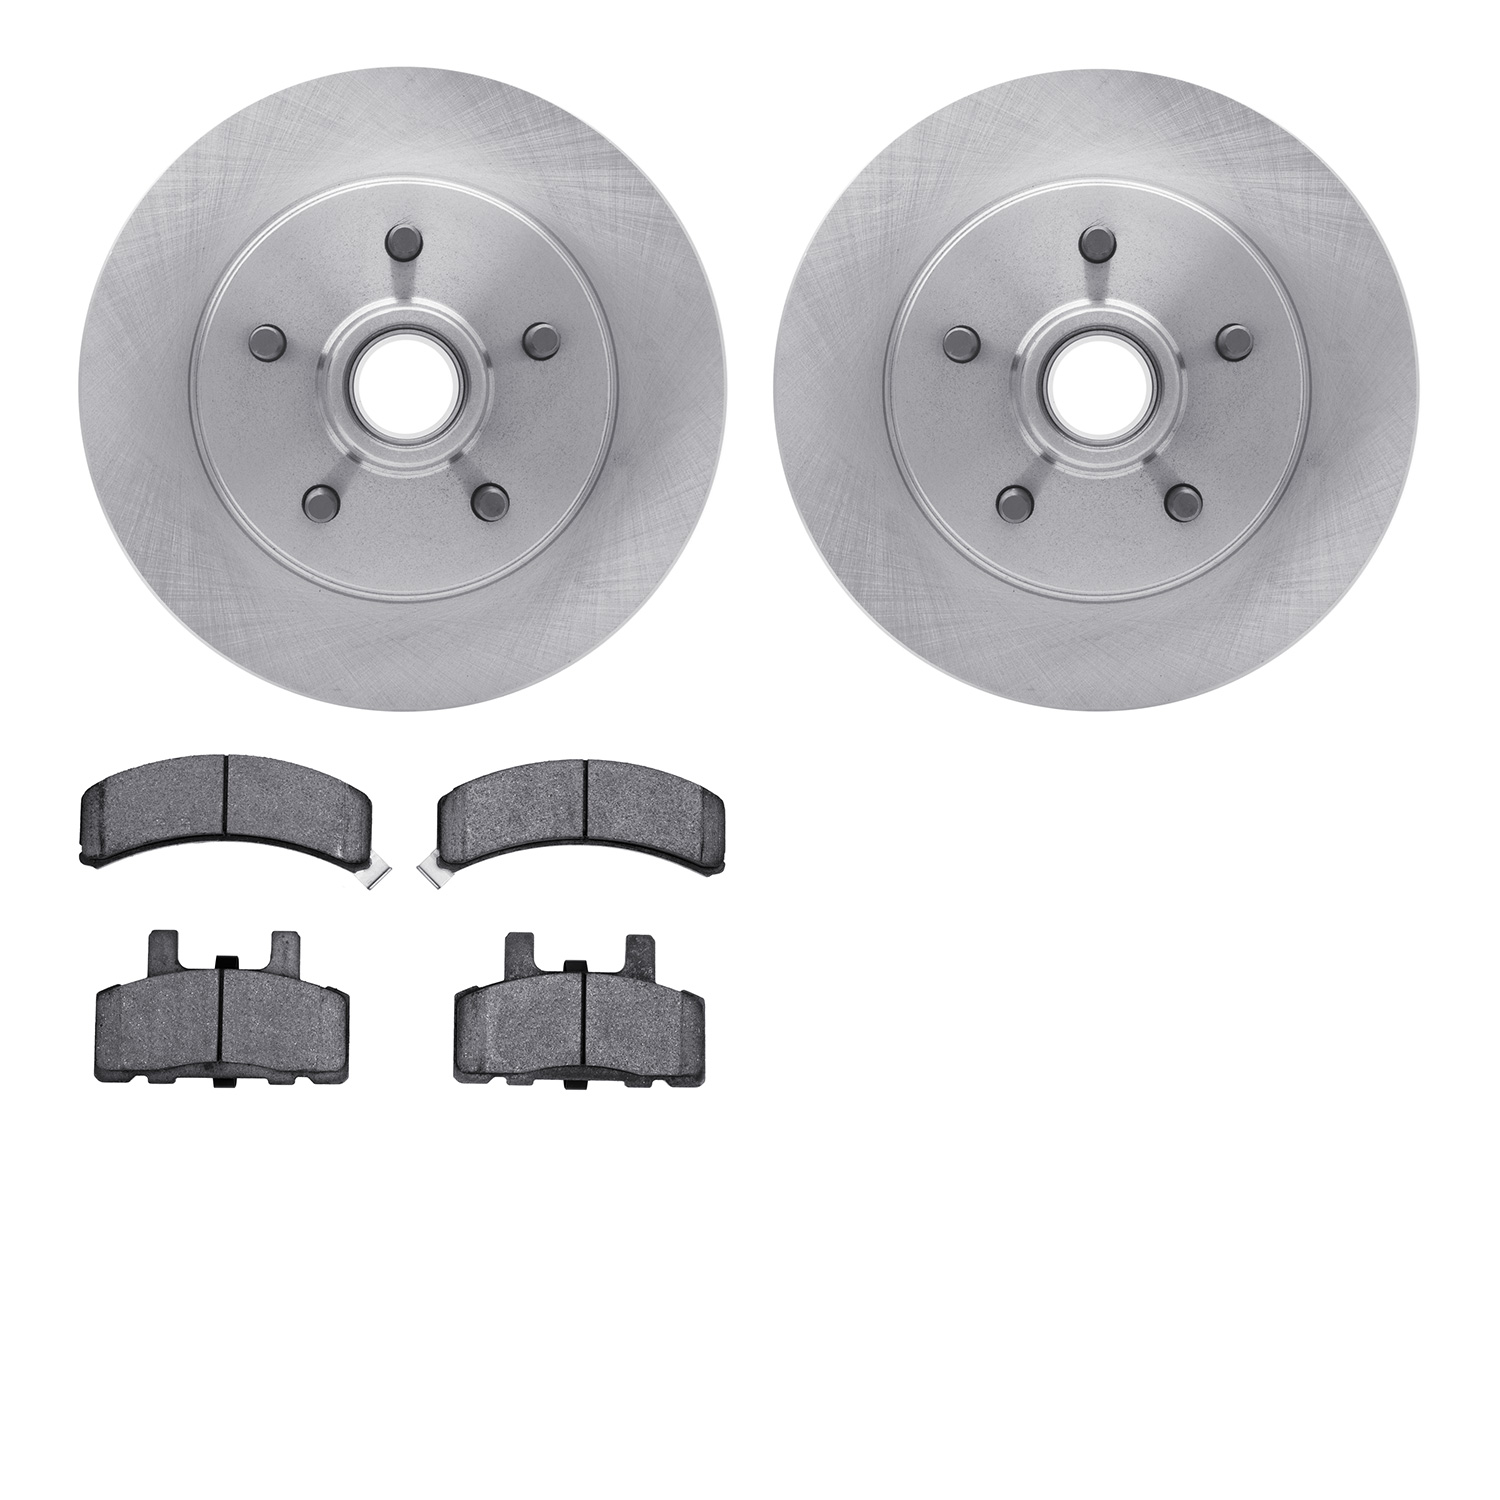 6402-48013 Brake Rotors with Ultimate-Duty Brake Pads, 1988-1994 GM, Position: Front